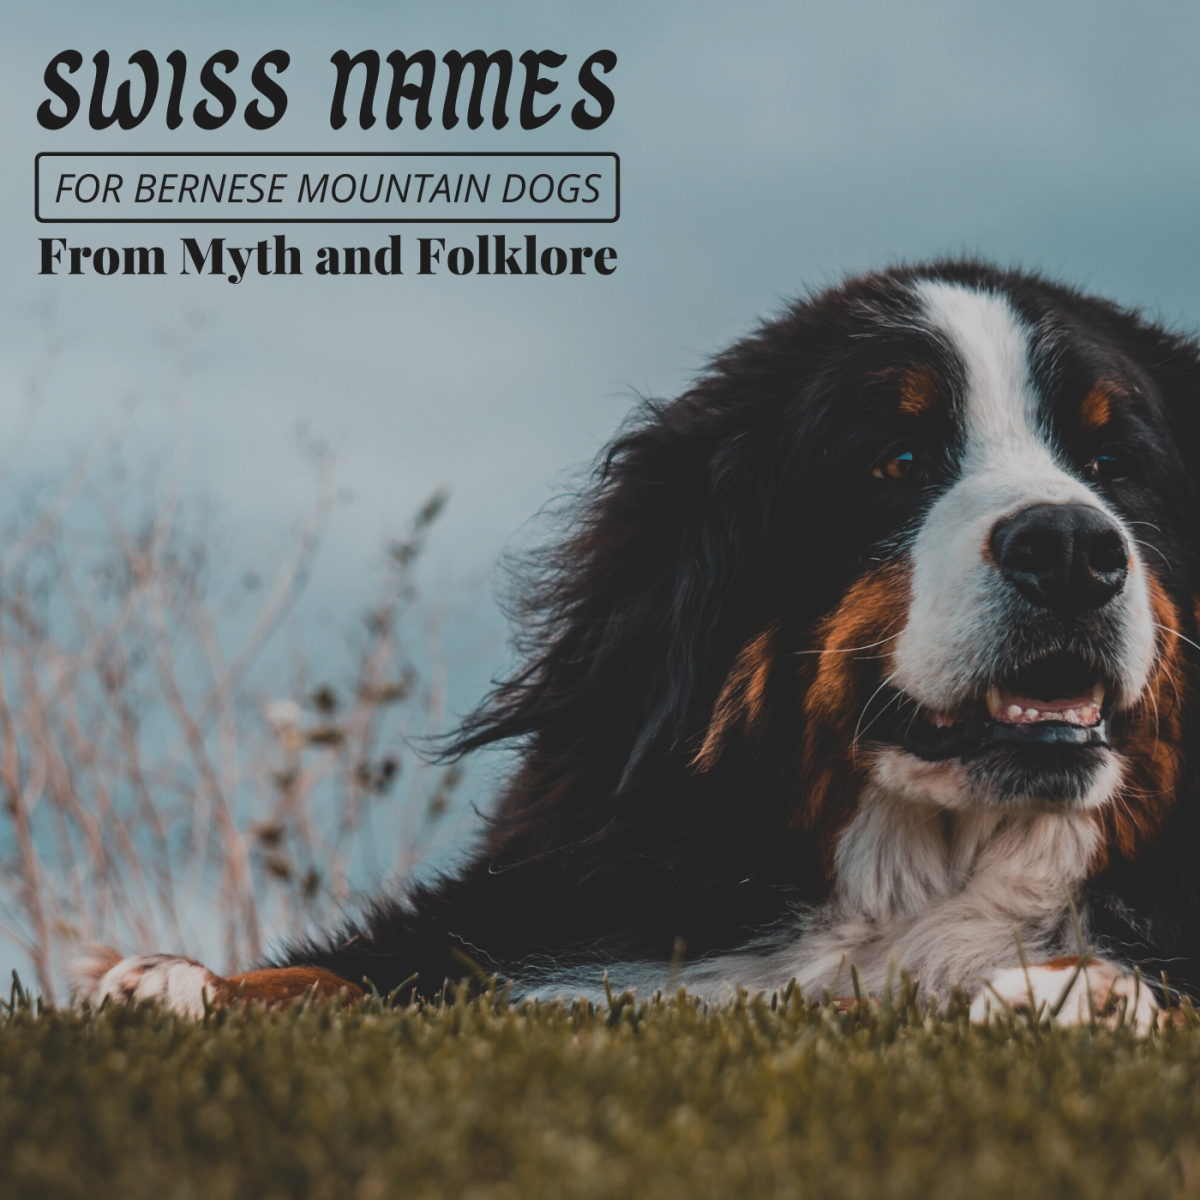 Why not give your Bernese Mountain Dog a genuine Swiss name from the country's folklore? 